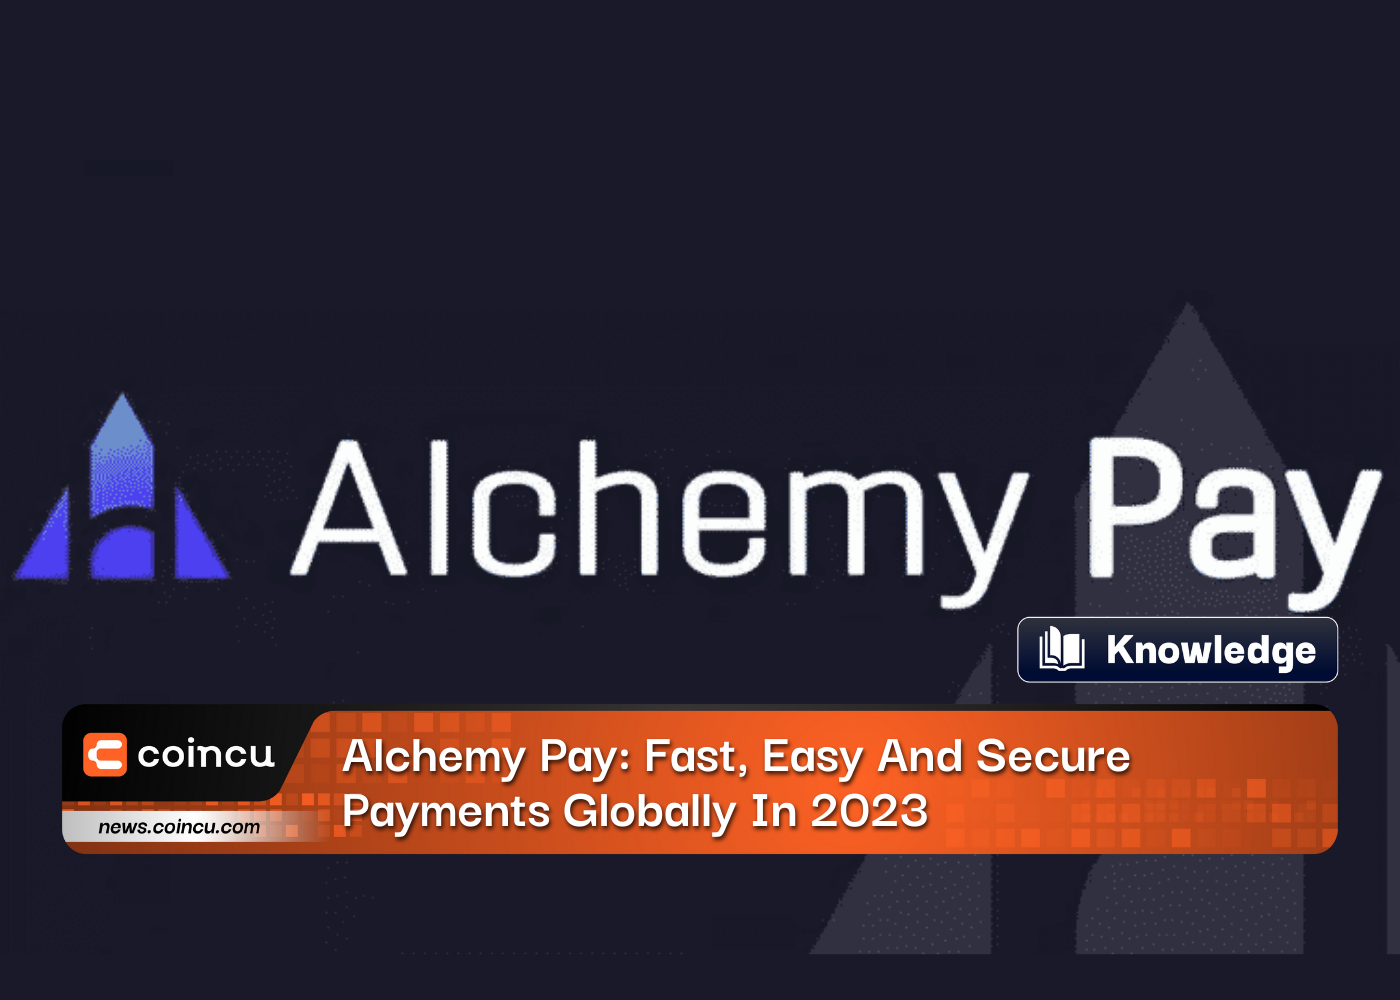 Alchemy Pay: Fast, Easy And Secure Payments Globally In 2023